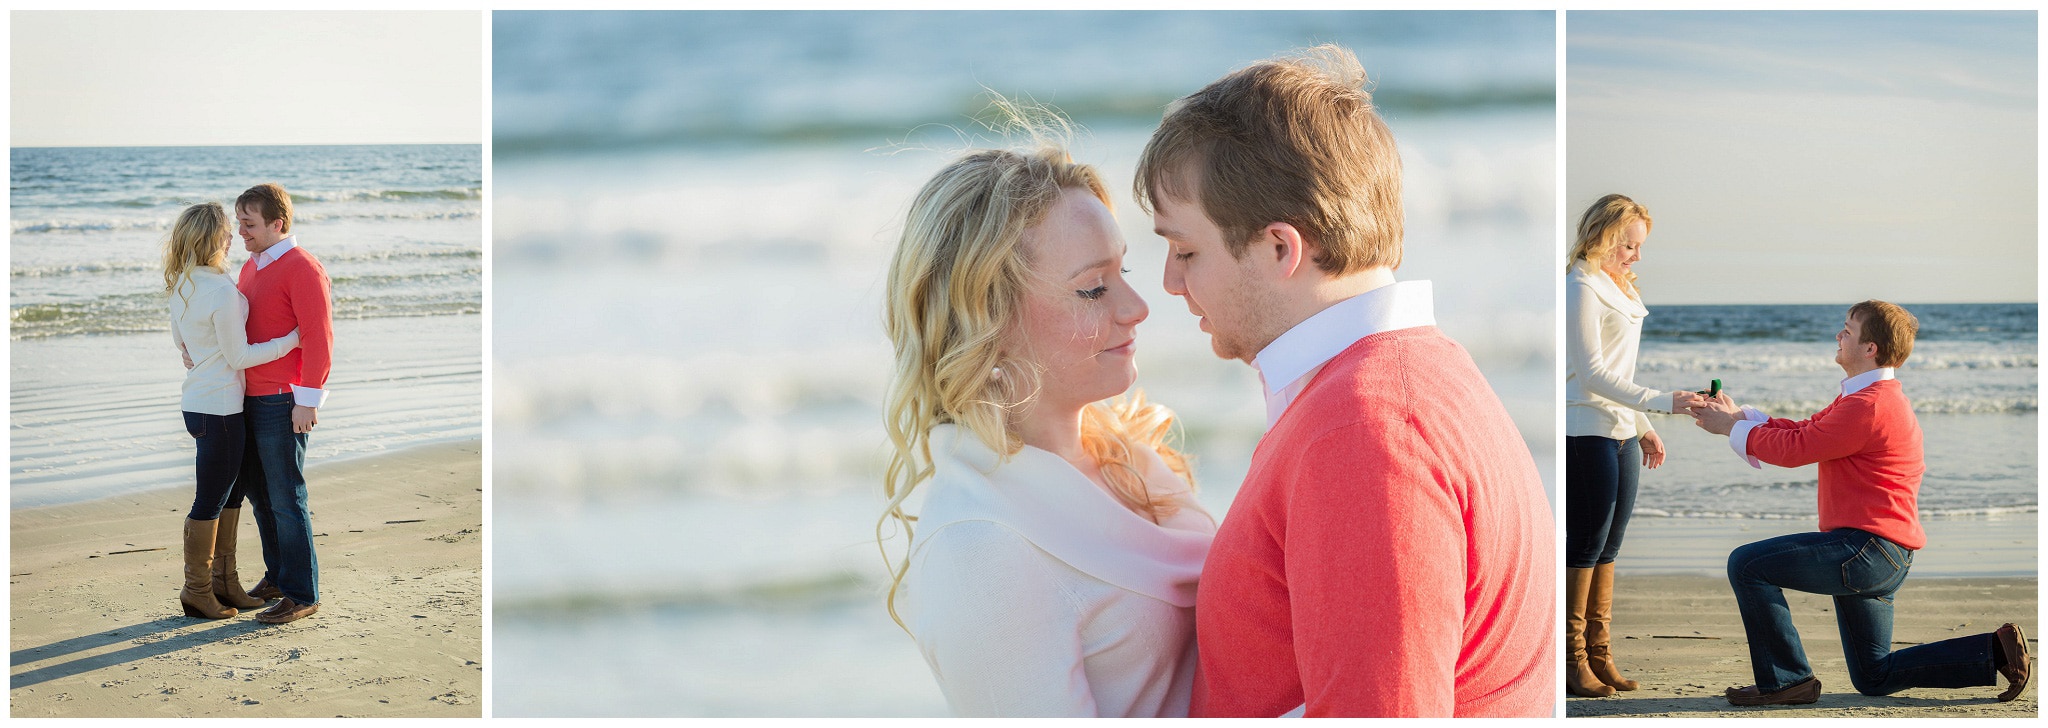 Myrtle Beach engagement photography by on the beach-3